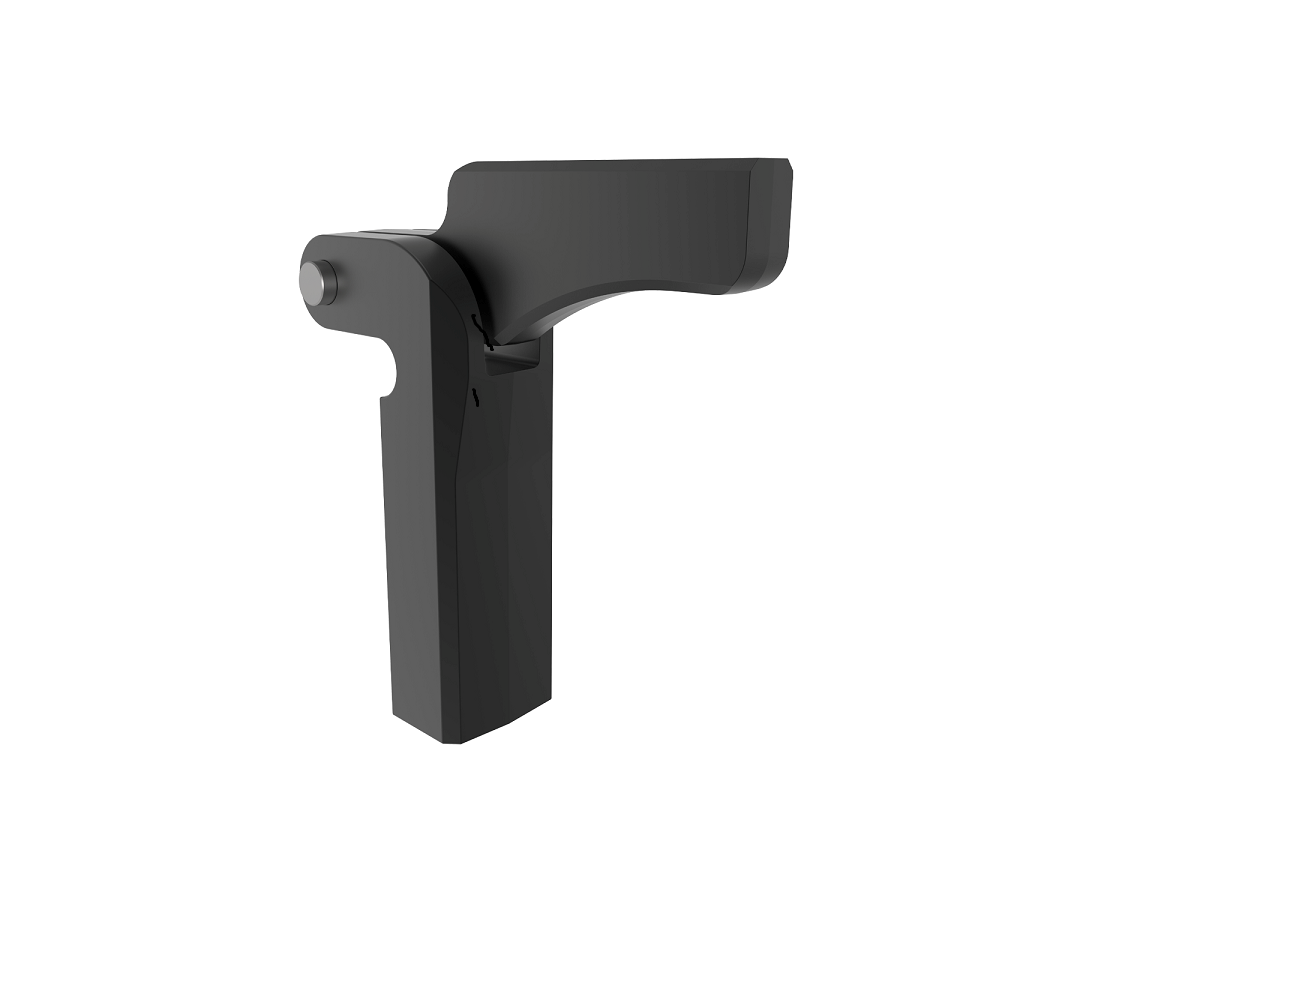 New counterbalance support hinge makes its debut

